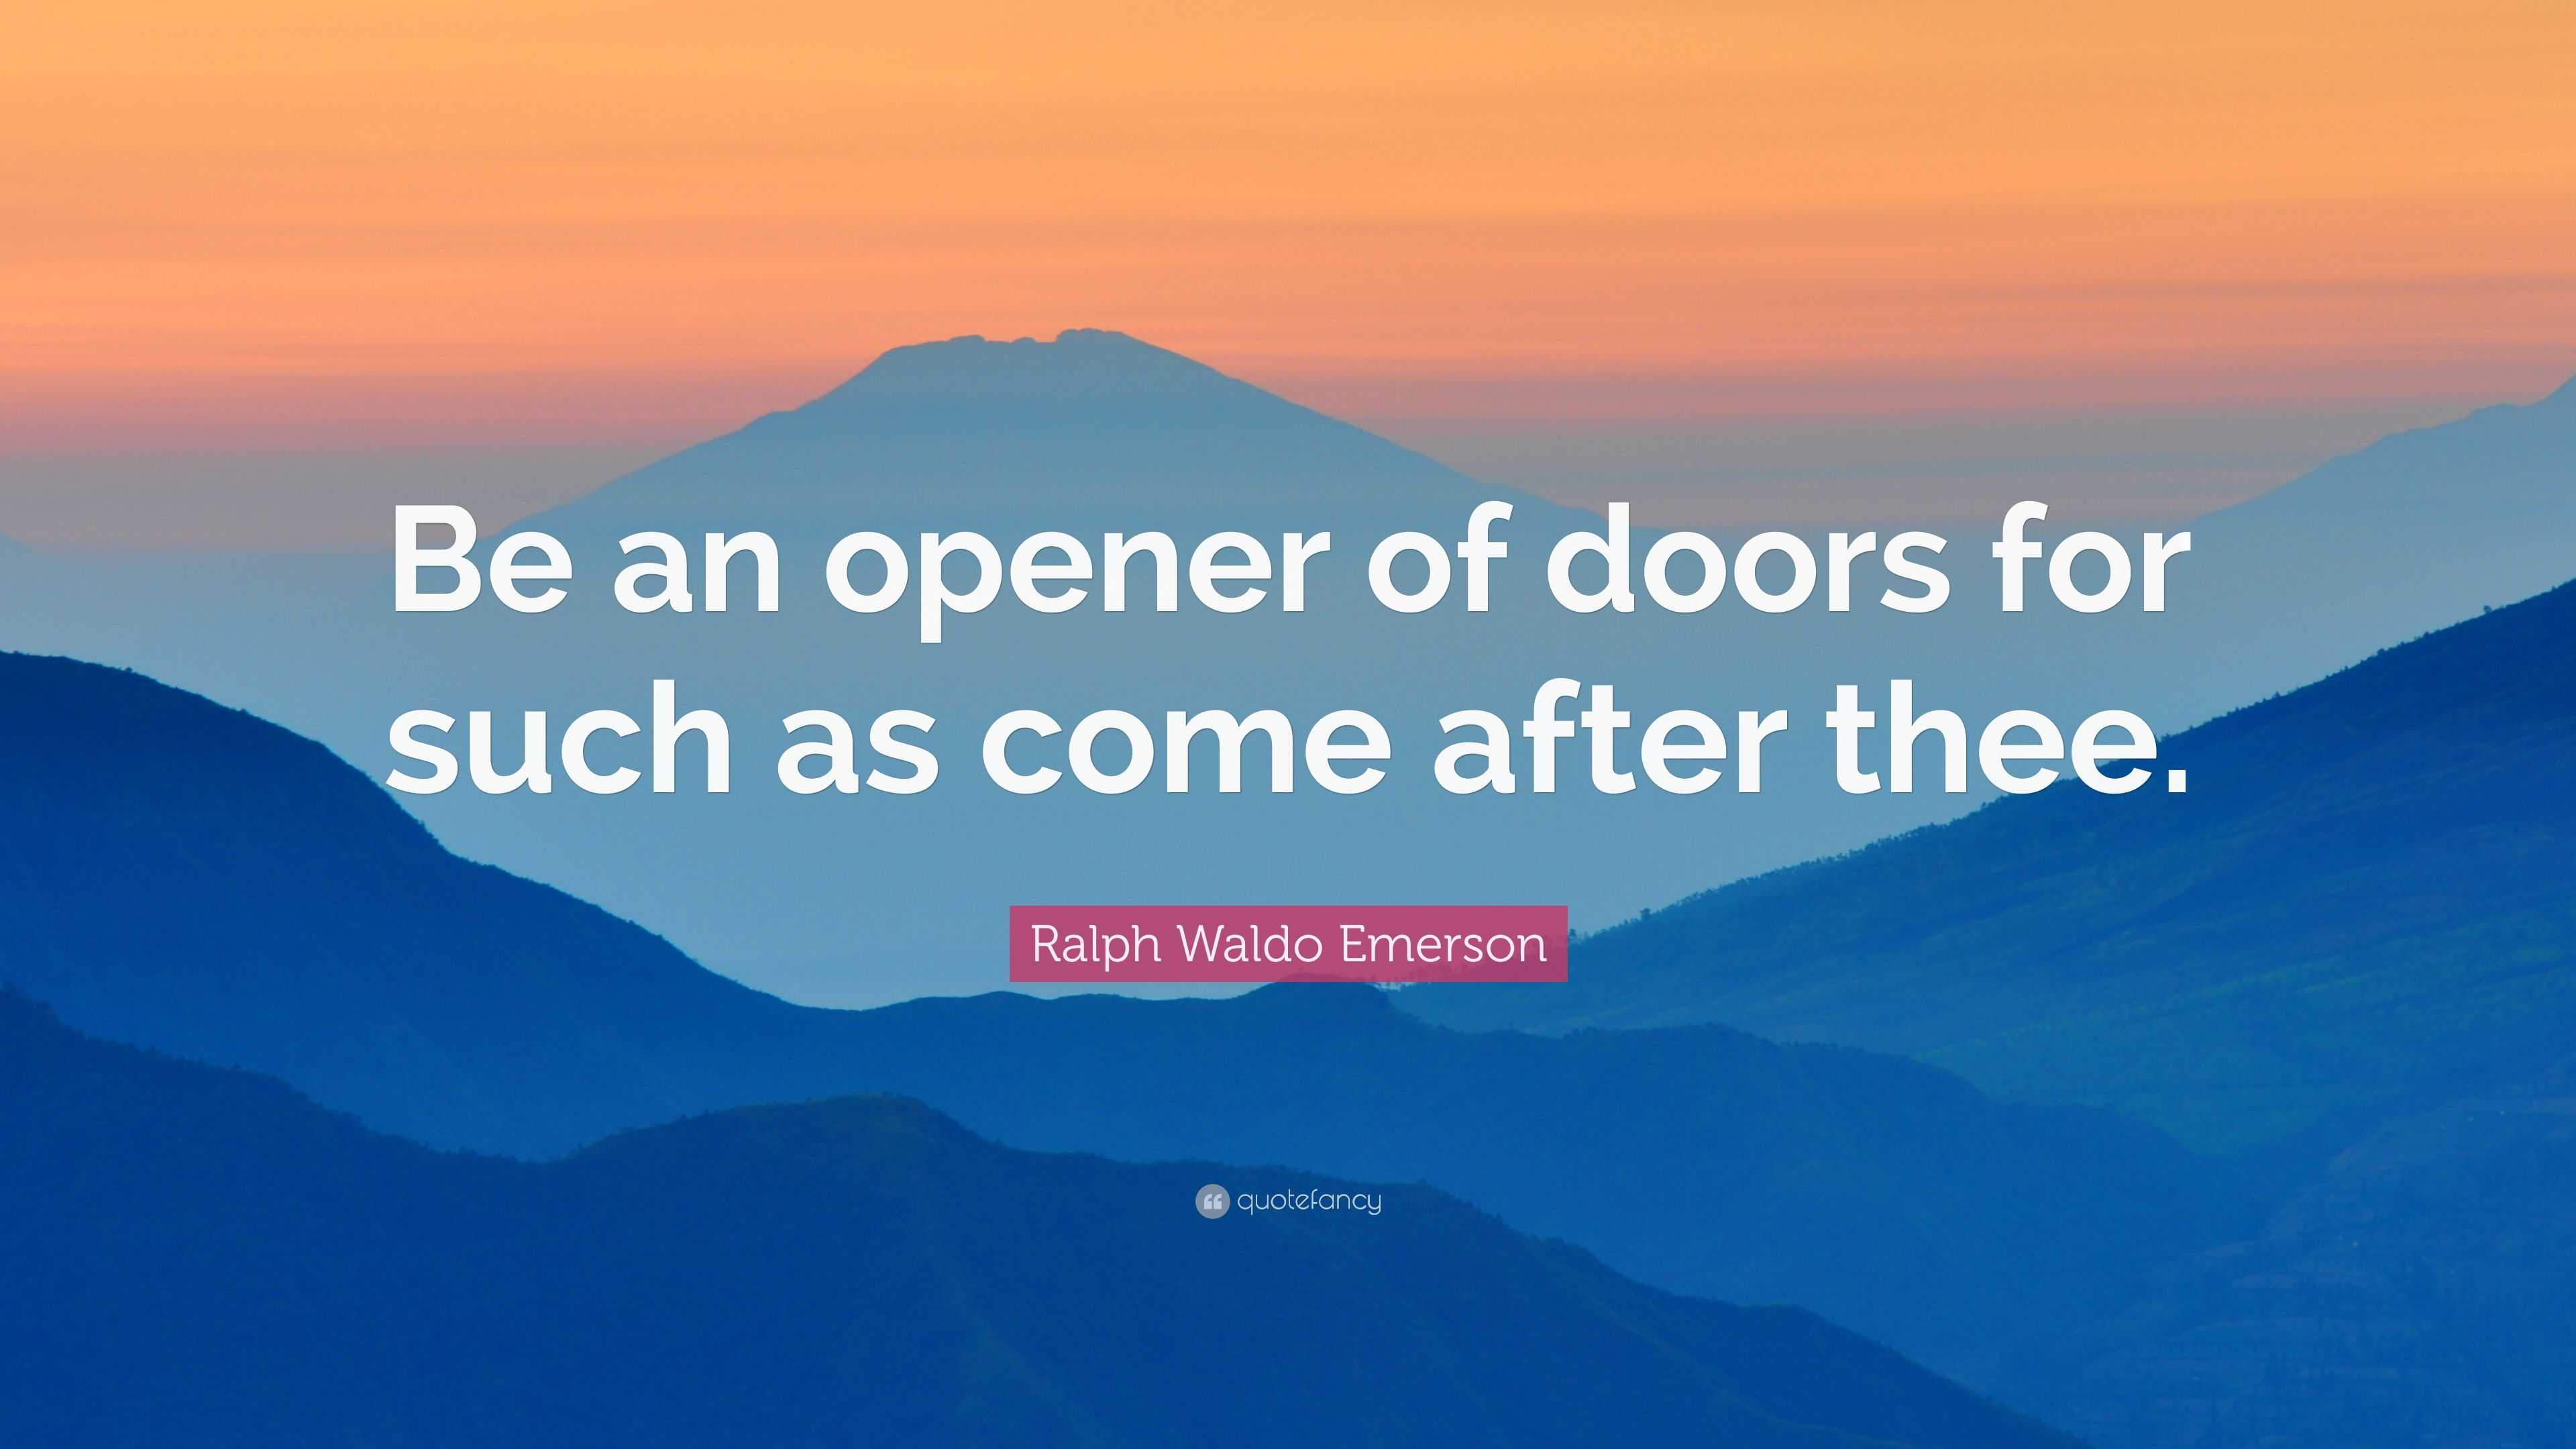 Ralph Waldo Emerson Quote: “Be an opener of doors for such as come ...